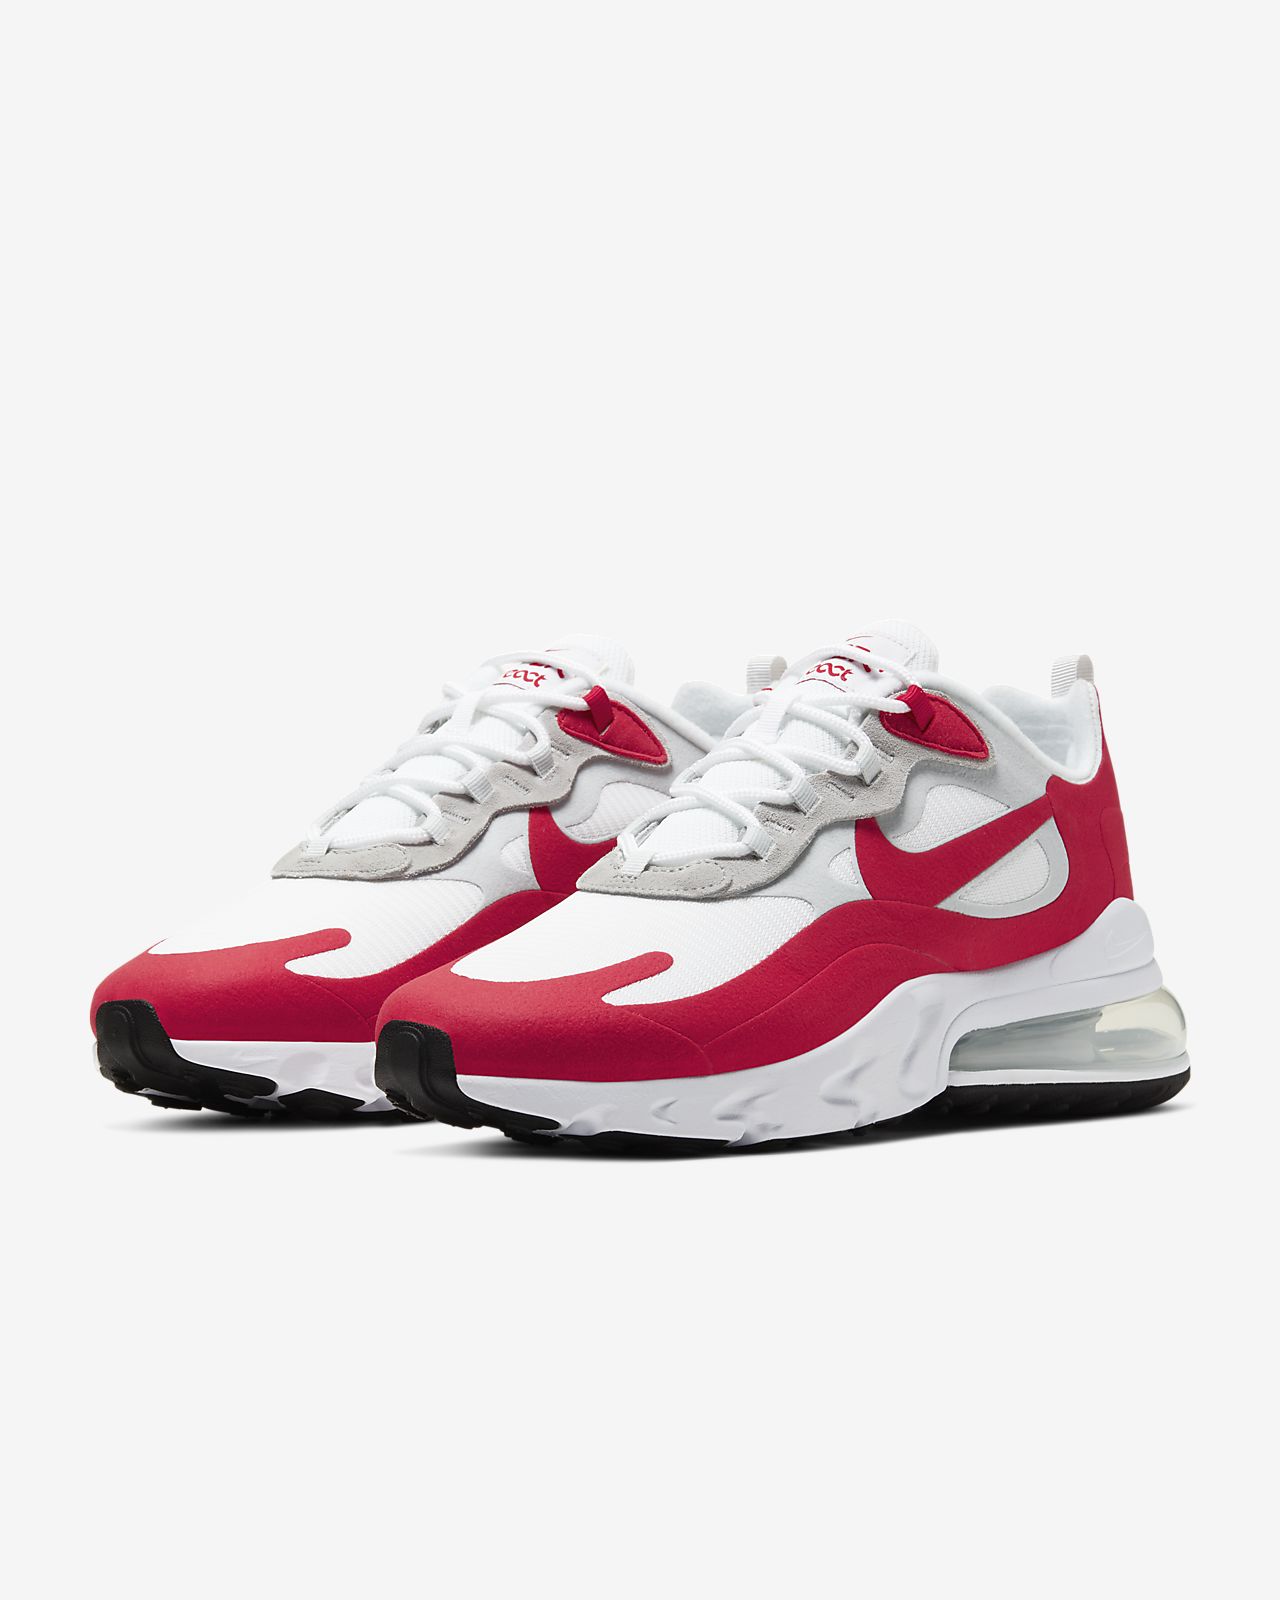 nike 270 red and white